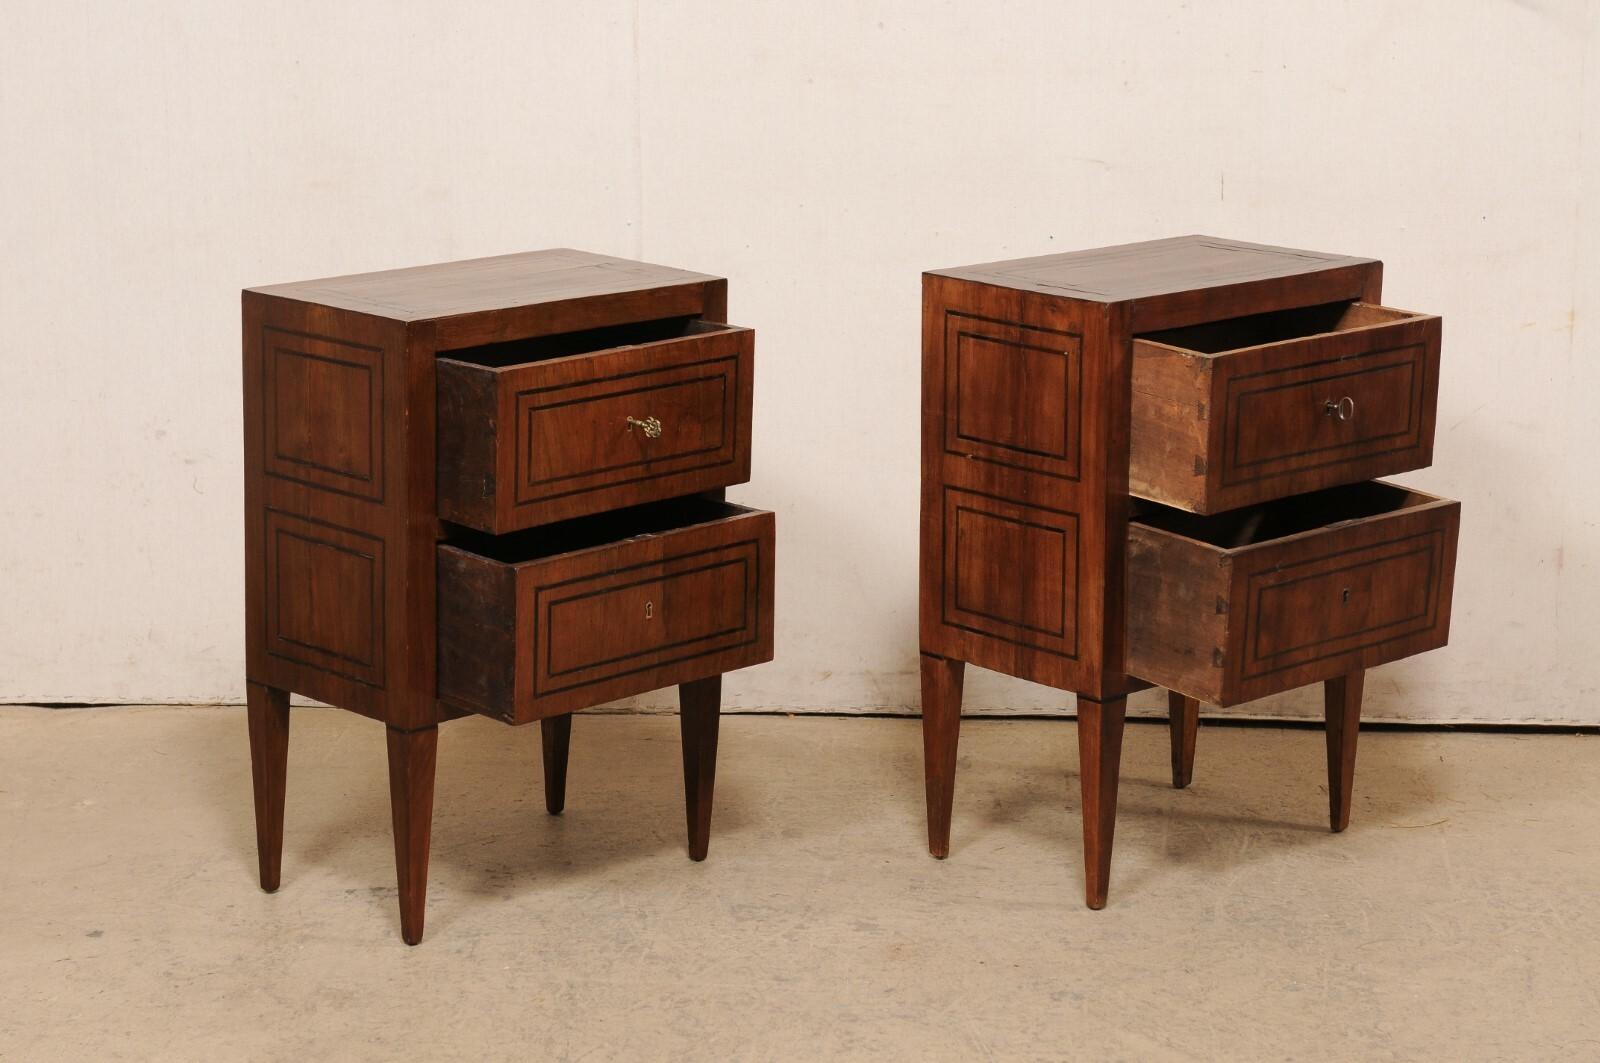 19th Century Italian Pair of Two-Drawer Side Chests w/Nice Inlay Banding, Early 19th C. For Sale